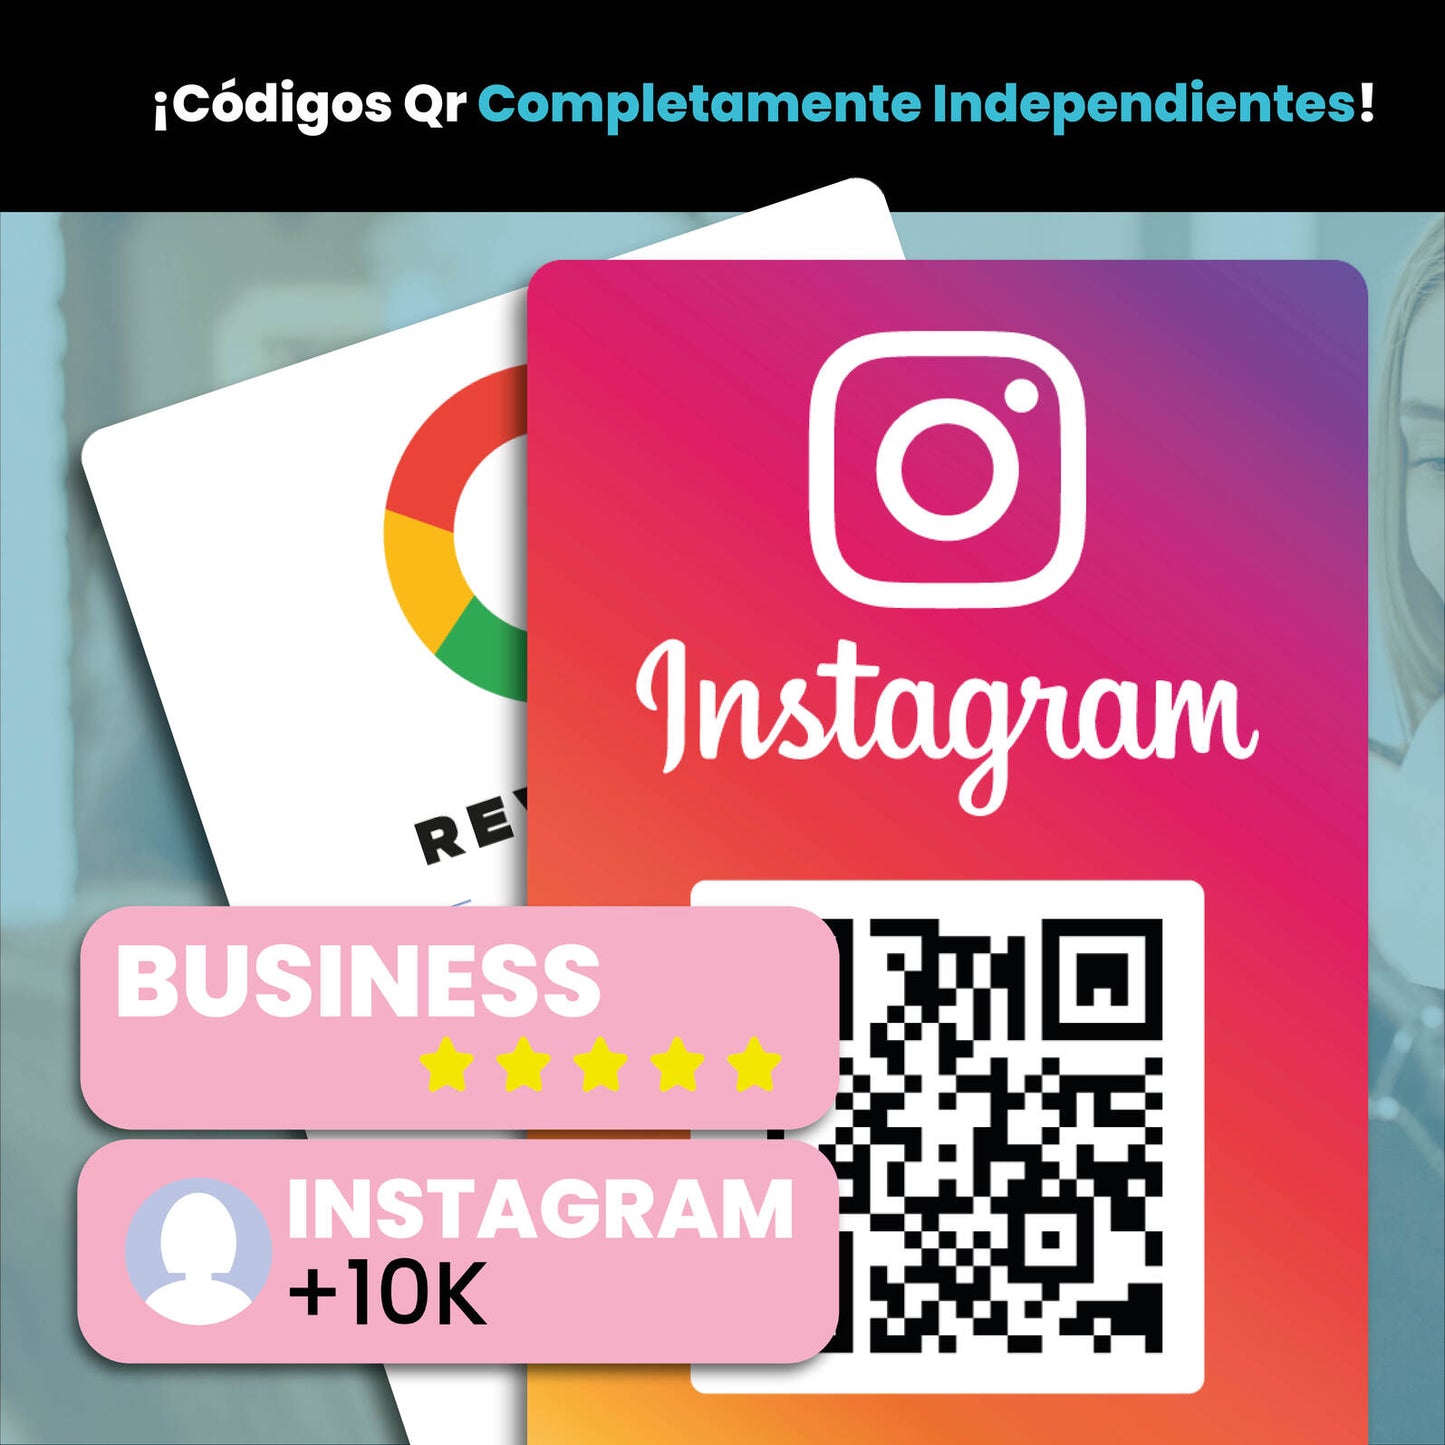 Google + Instagram Review Card - Get Reviews and Followers